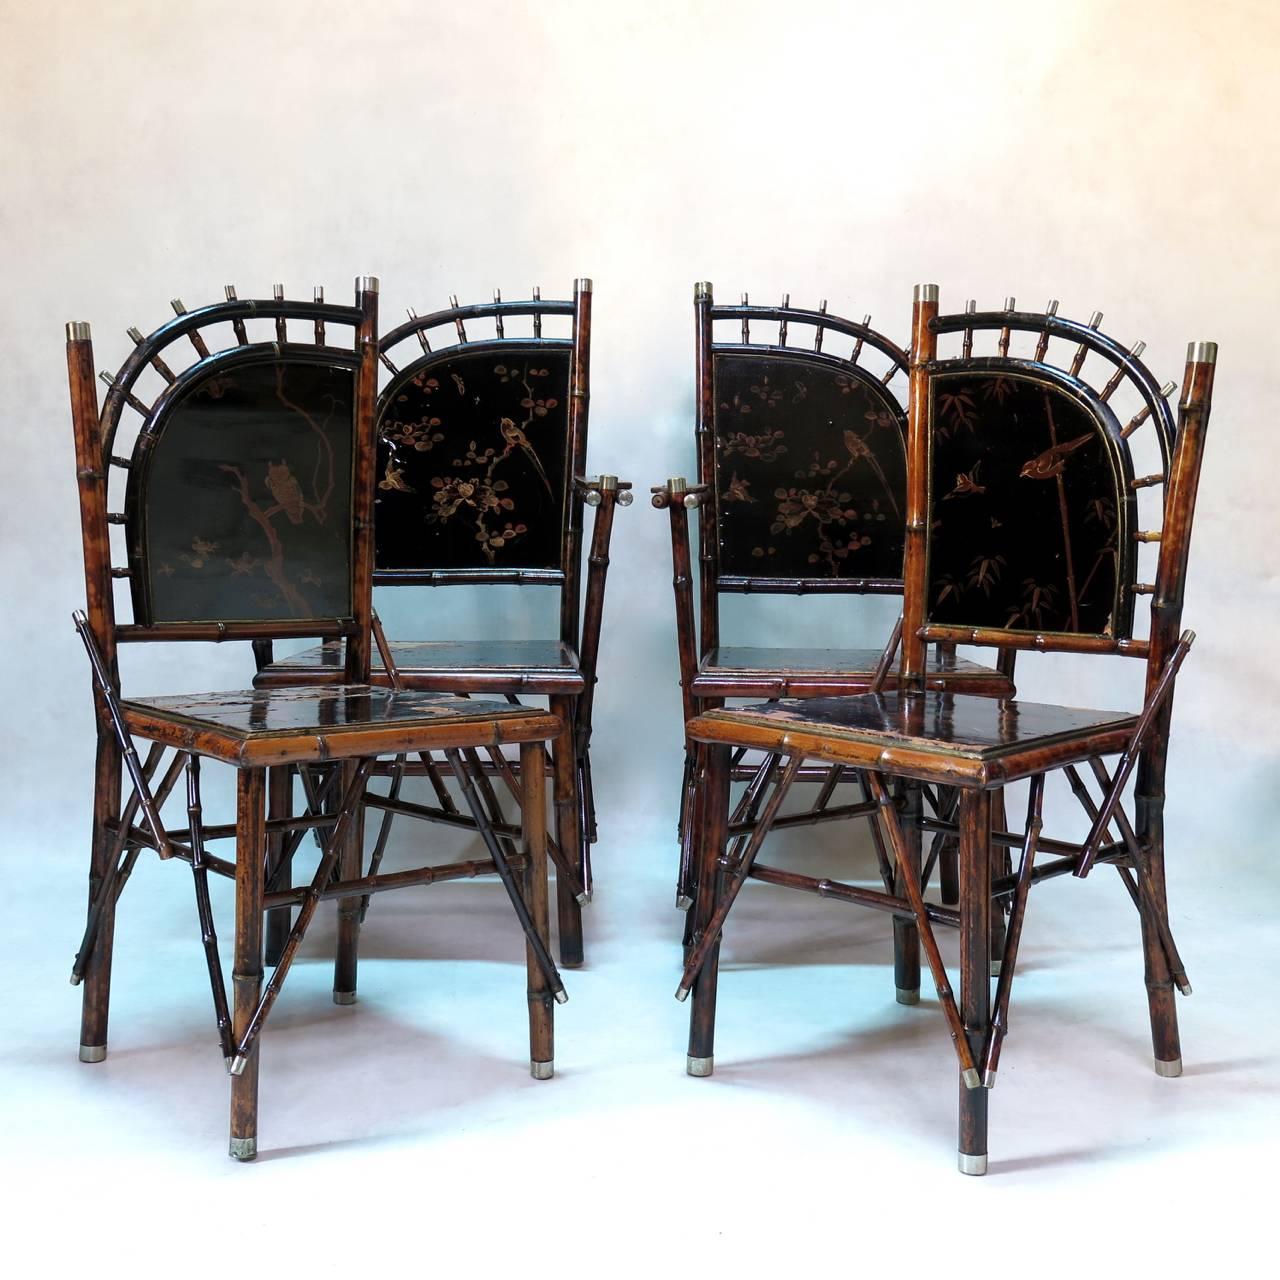 Very unusual set of Napoleon III era Japonisme-style dining room chairs (six chairs and two carvers). 

The spindle backs fan upwards and outwards. 
 
Faux-bamboo structure (some with a speckled tortoiseshell effect), ending in metal caps